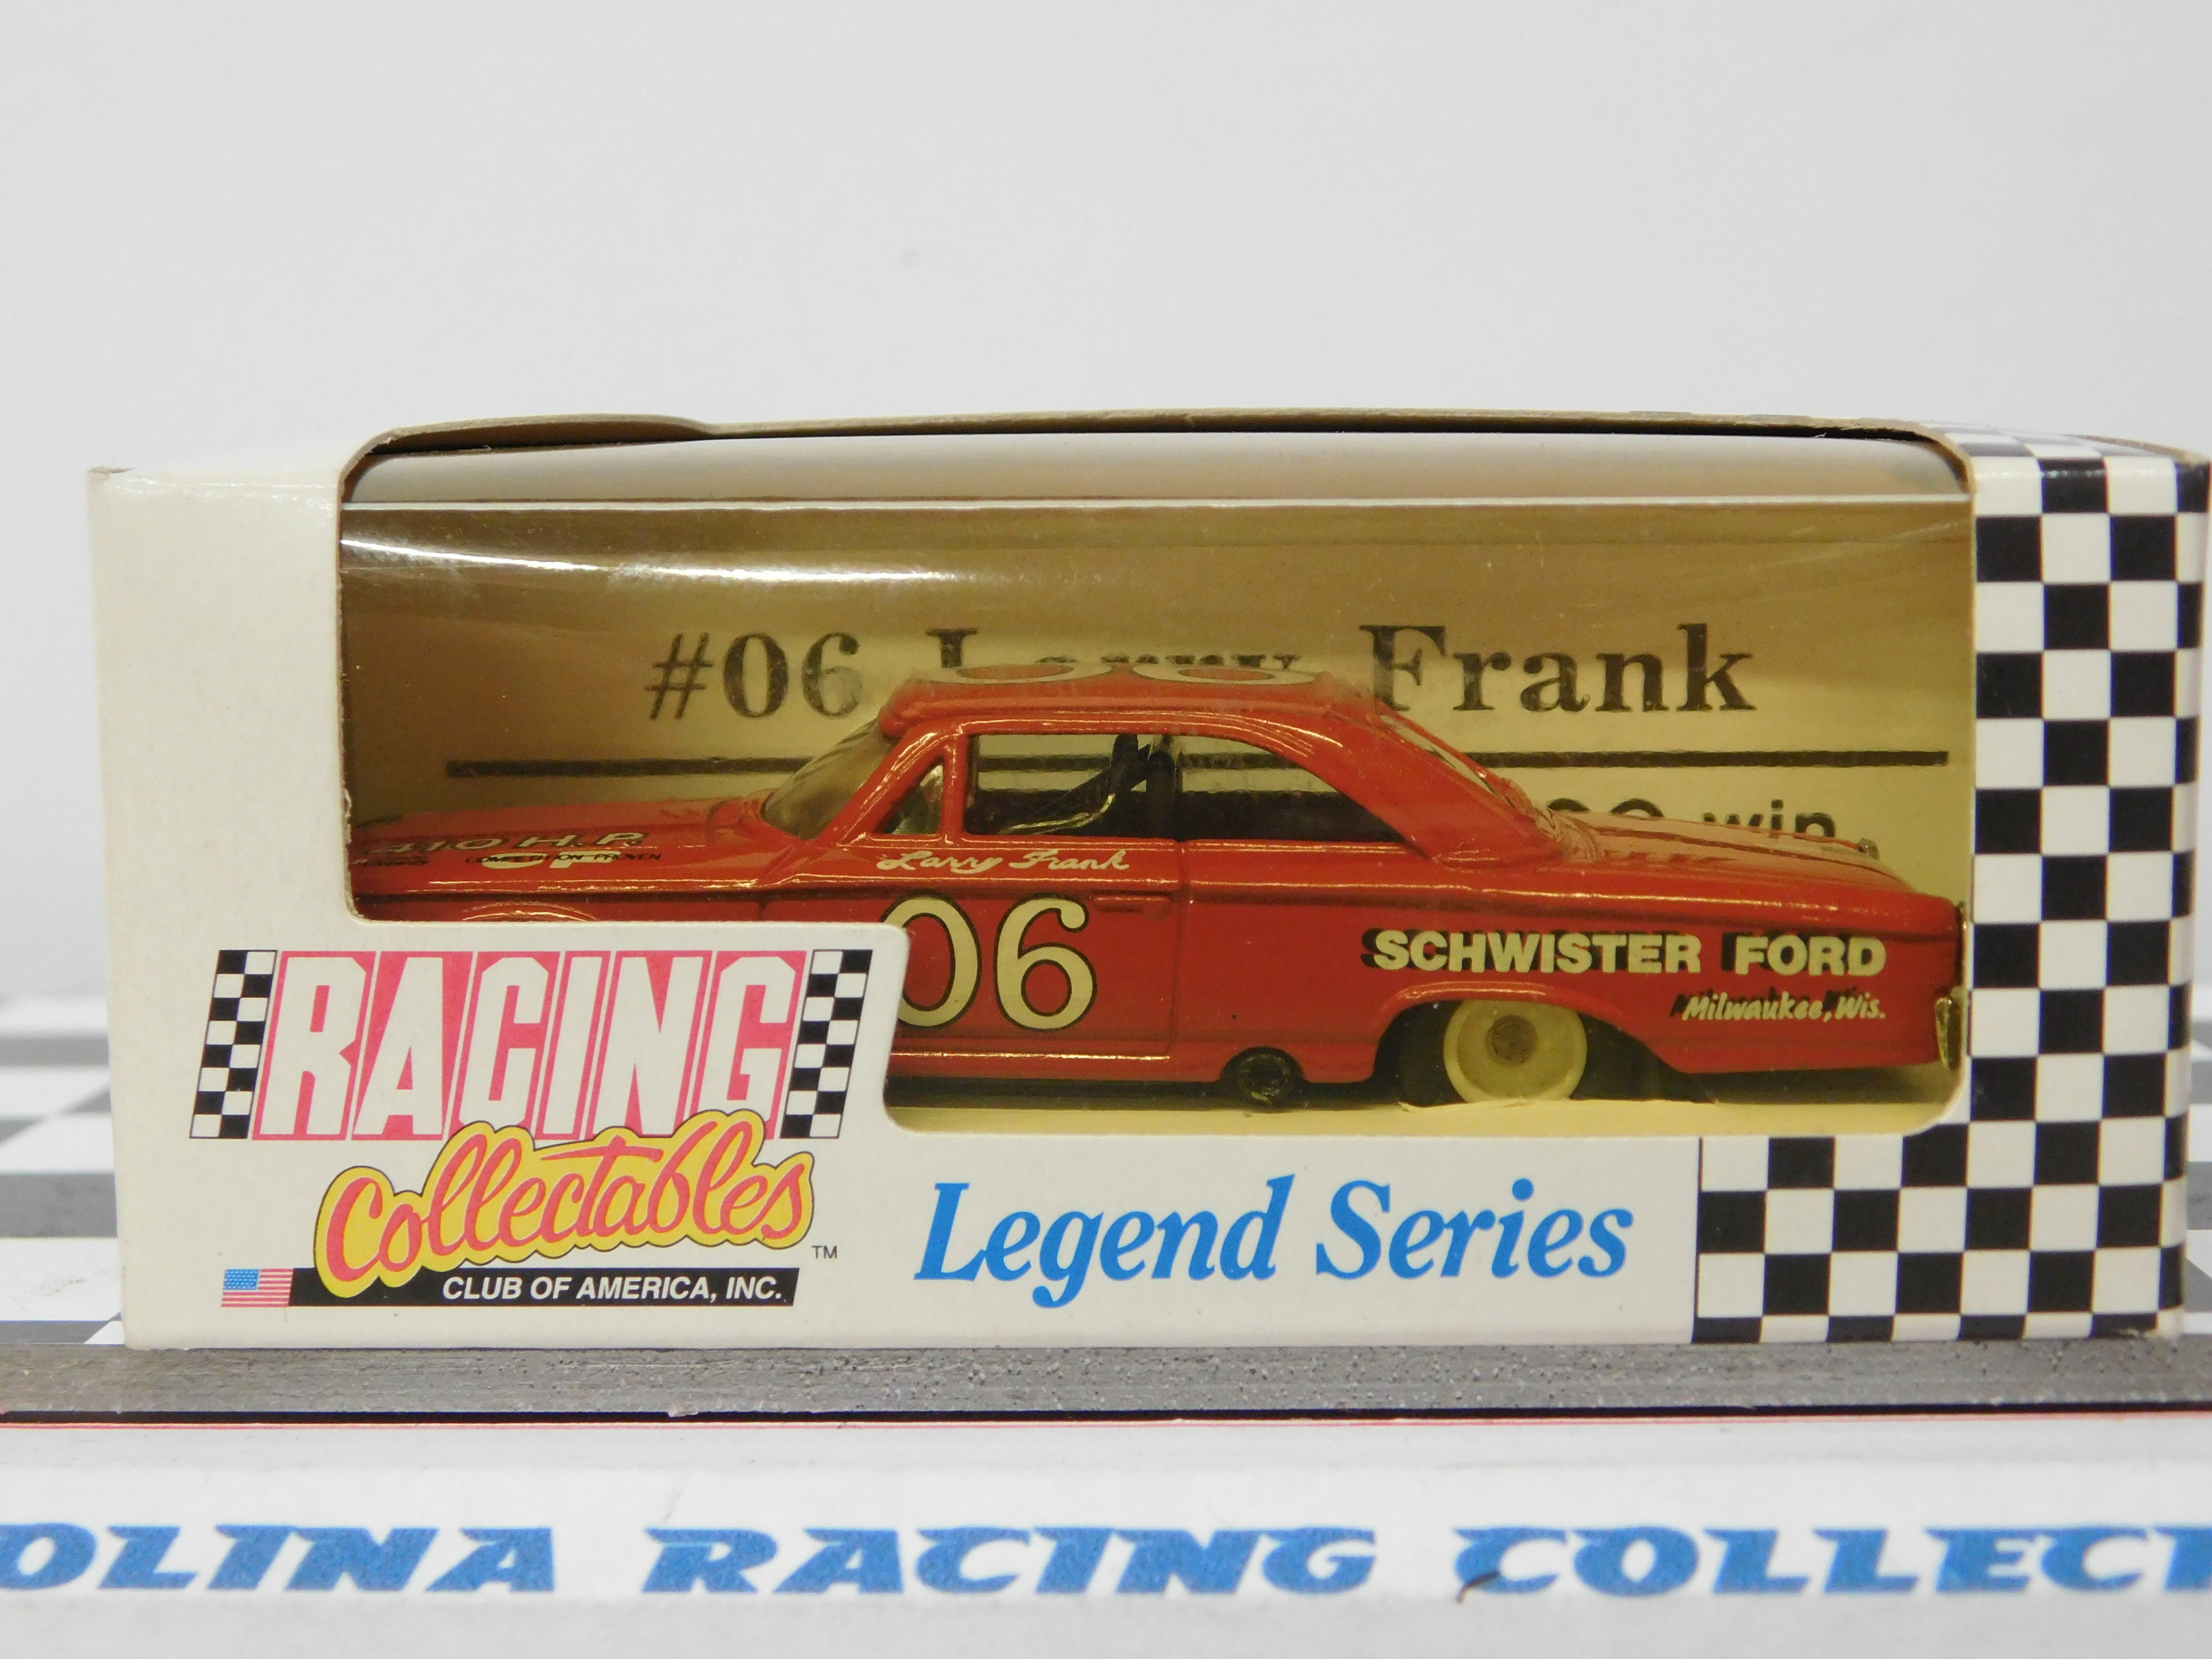 Larry Frank 1/64 #06 Schwister Ford 1963 Ford Galaxie